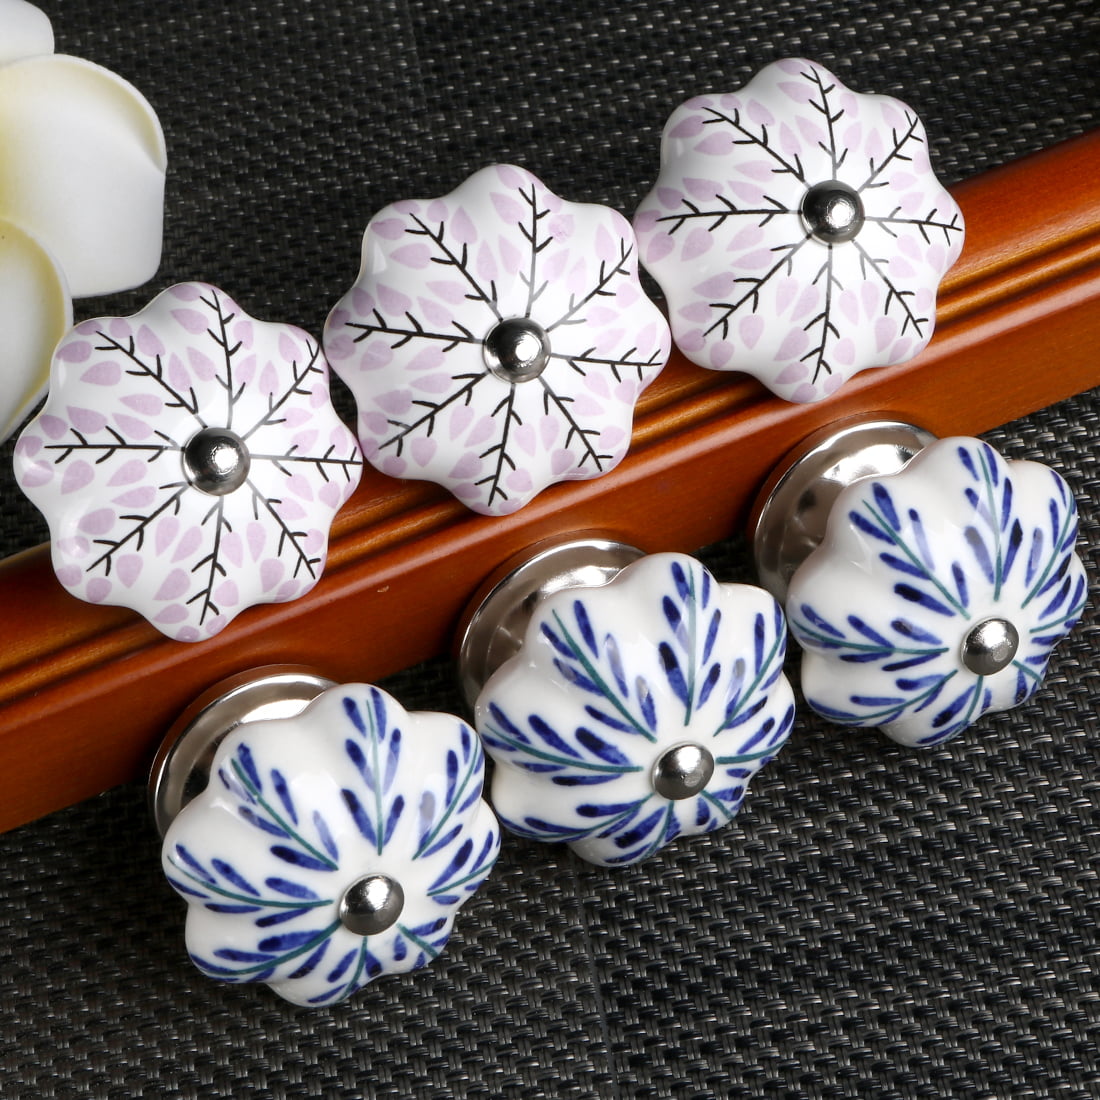 6pcs-hand-painted-ceramic-door-knobs-cabinet-drawer-pull-handles